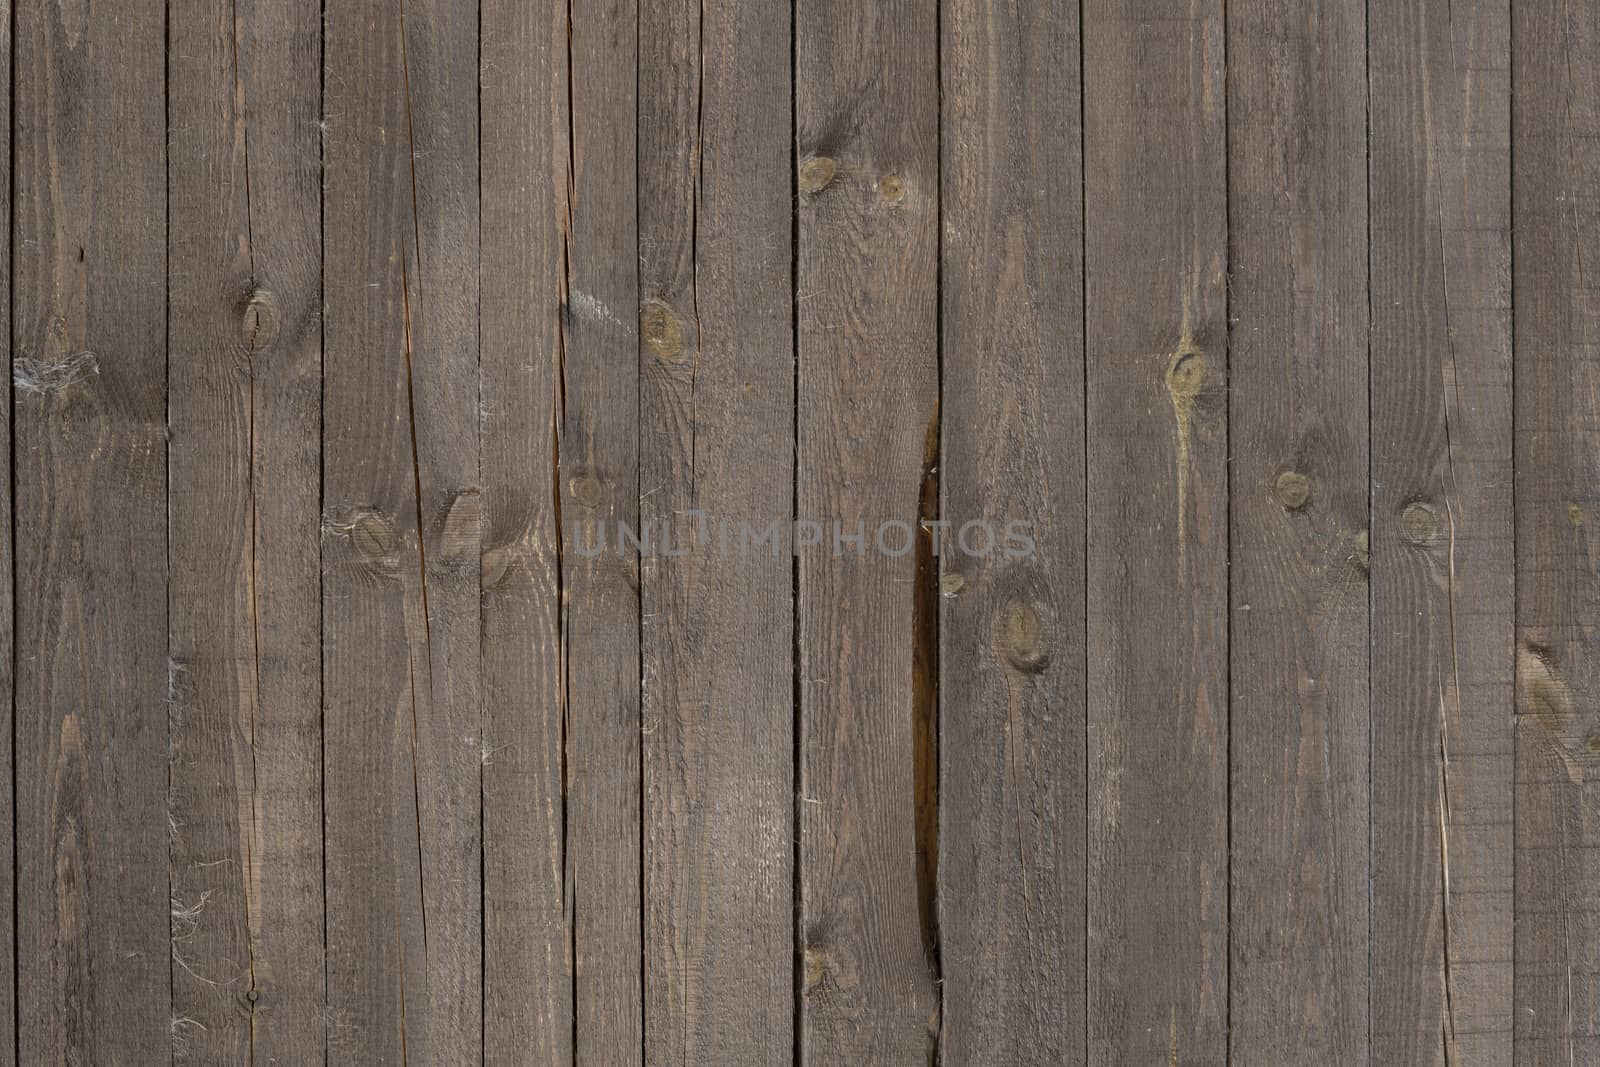 Wood texture with natural wood pattern for design, decoration